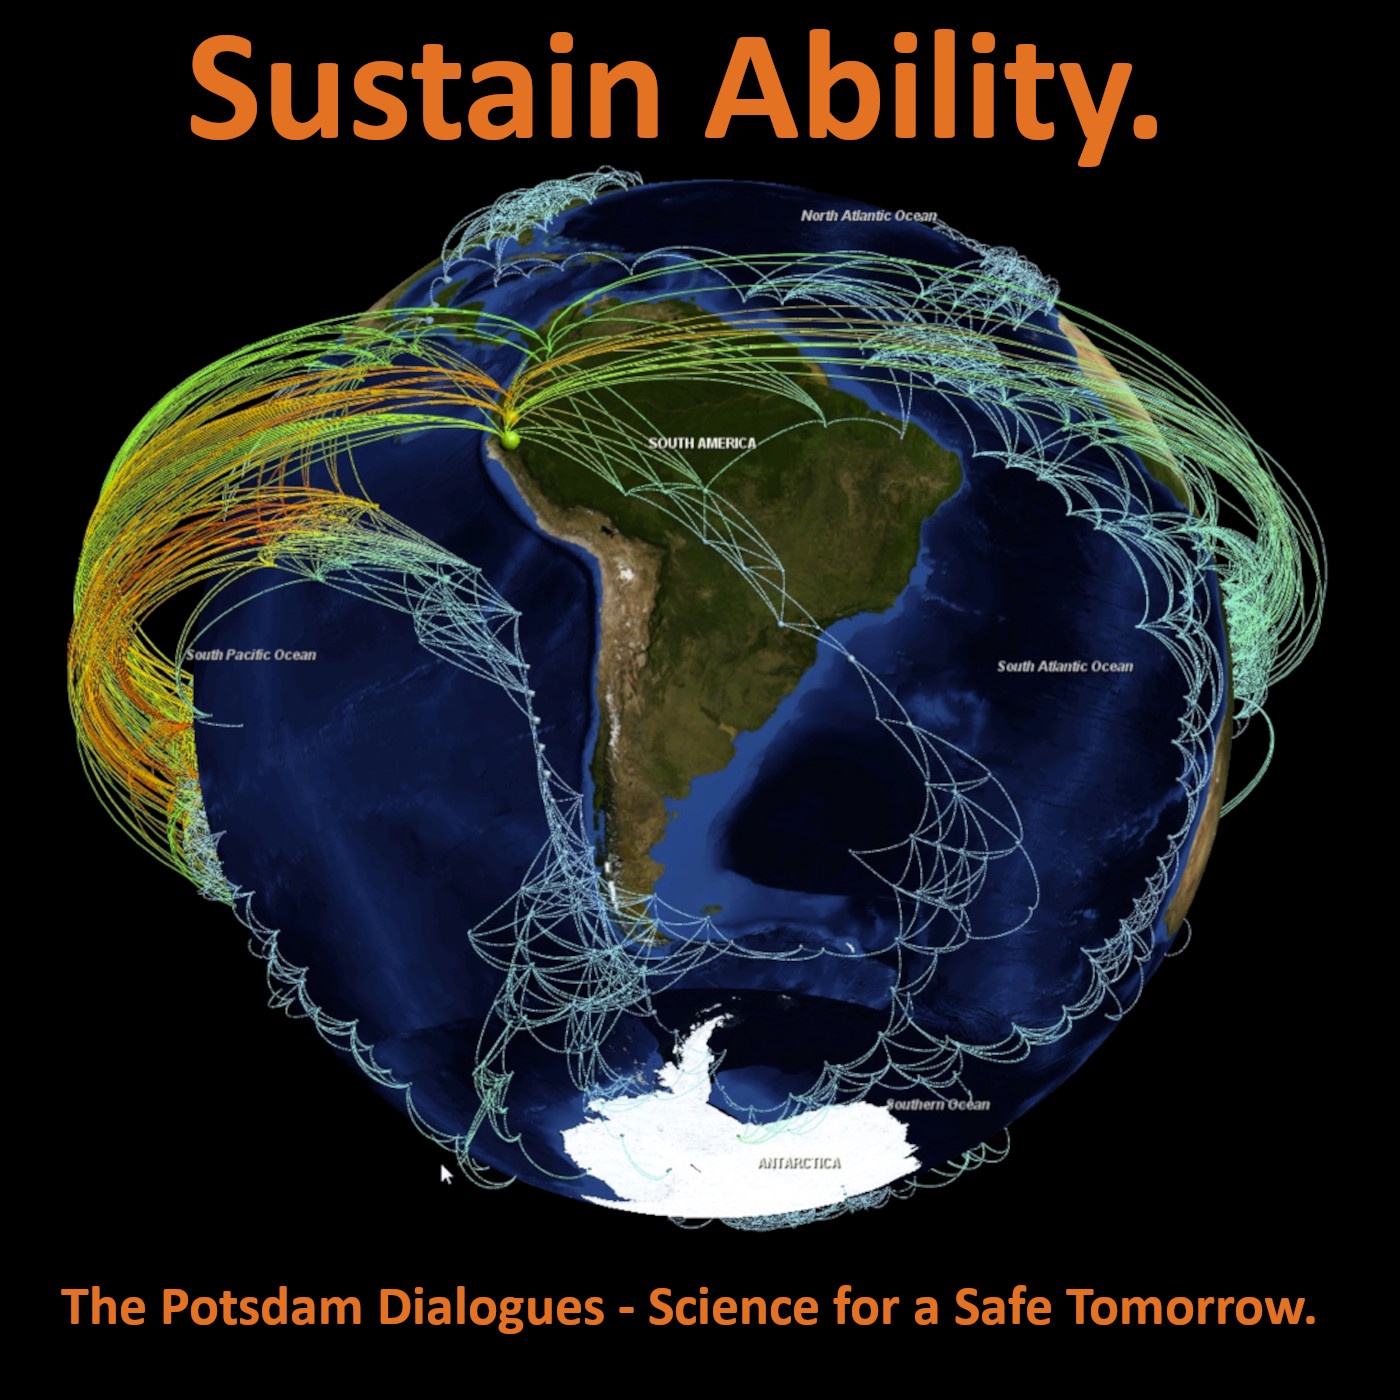 Sustain Ability. The Potsdam Dialogues - Science for a Safe Tomorrow.